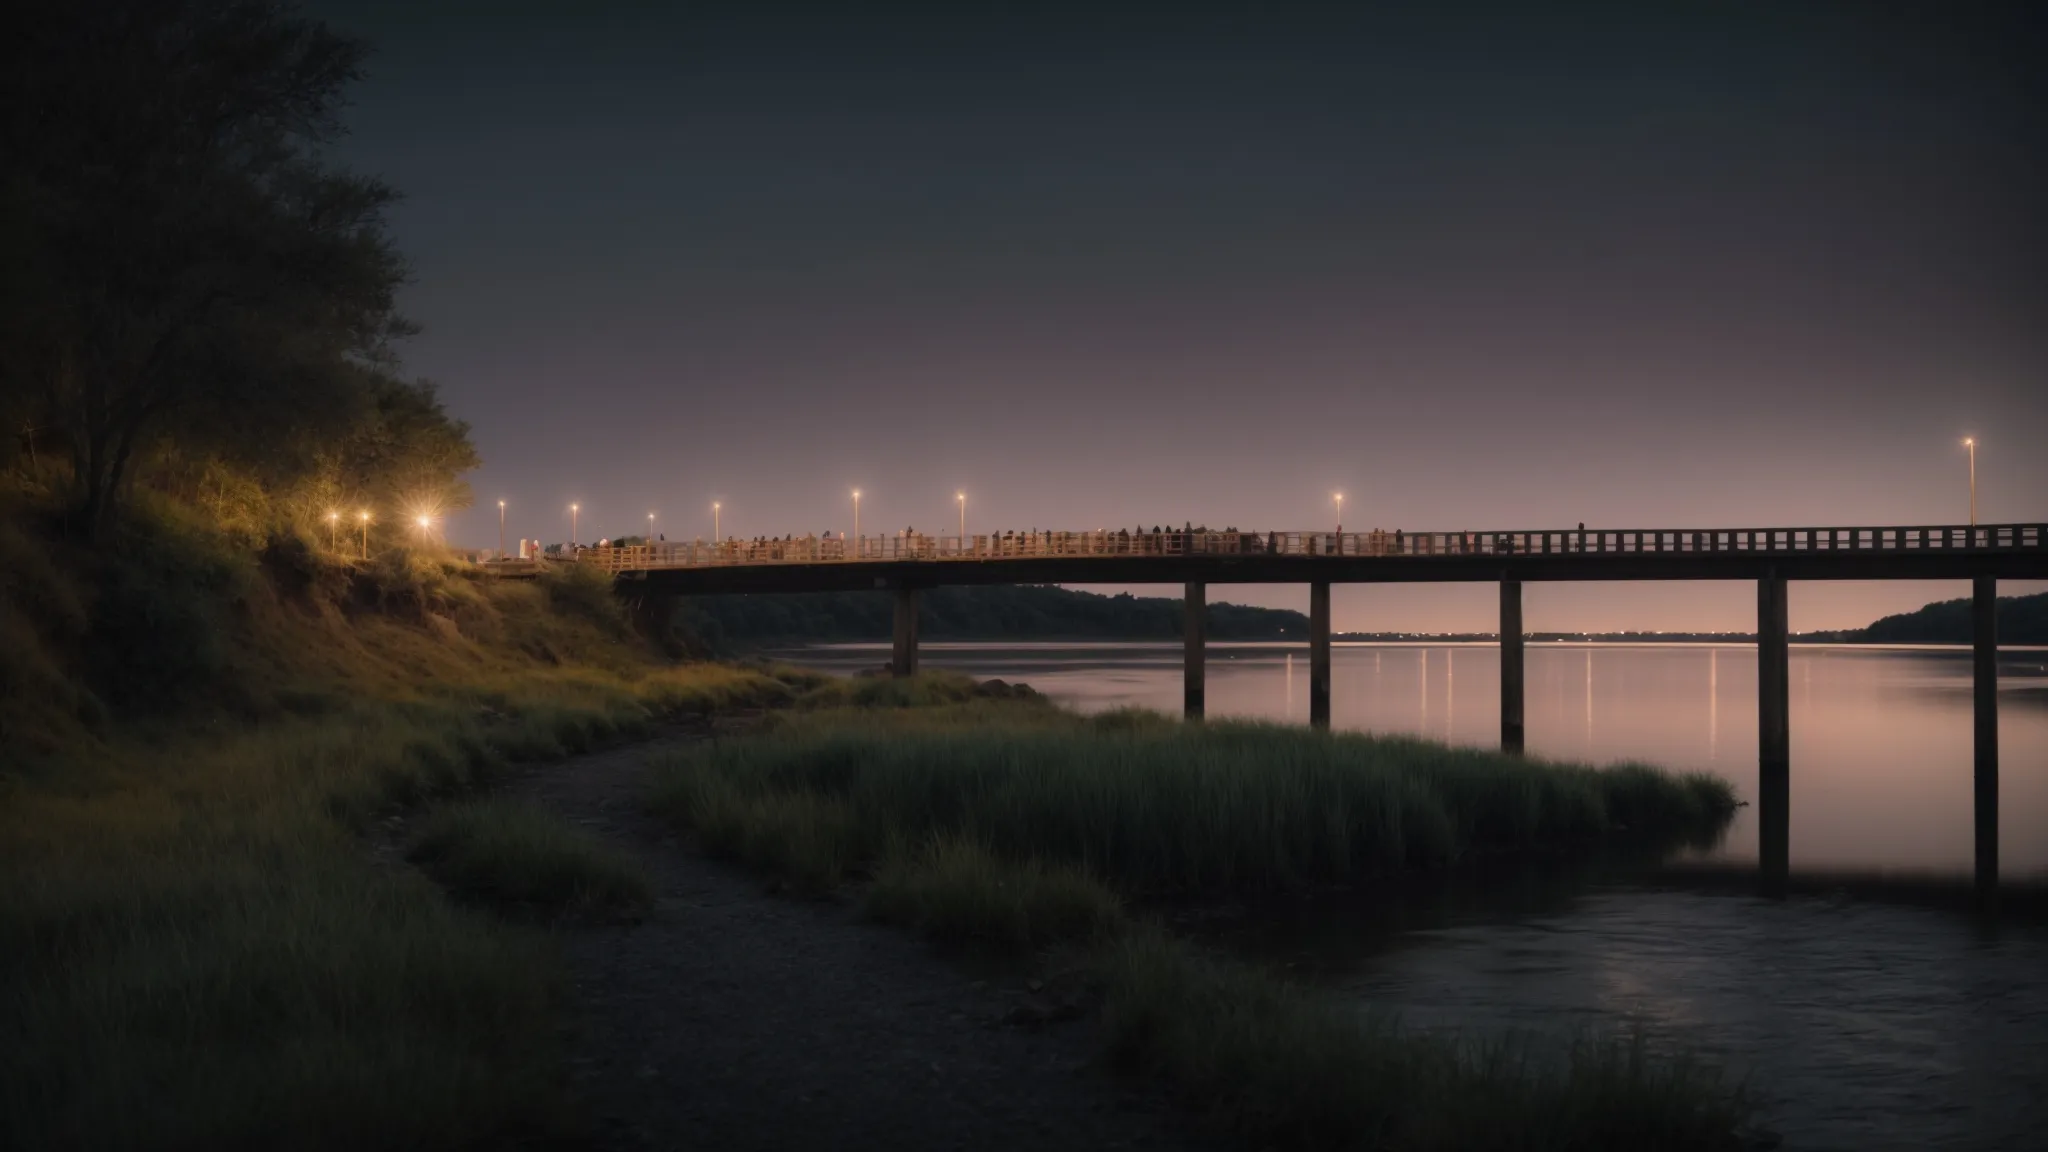 a single illuminated bridge connecting two lands across a calm river at dusk.